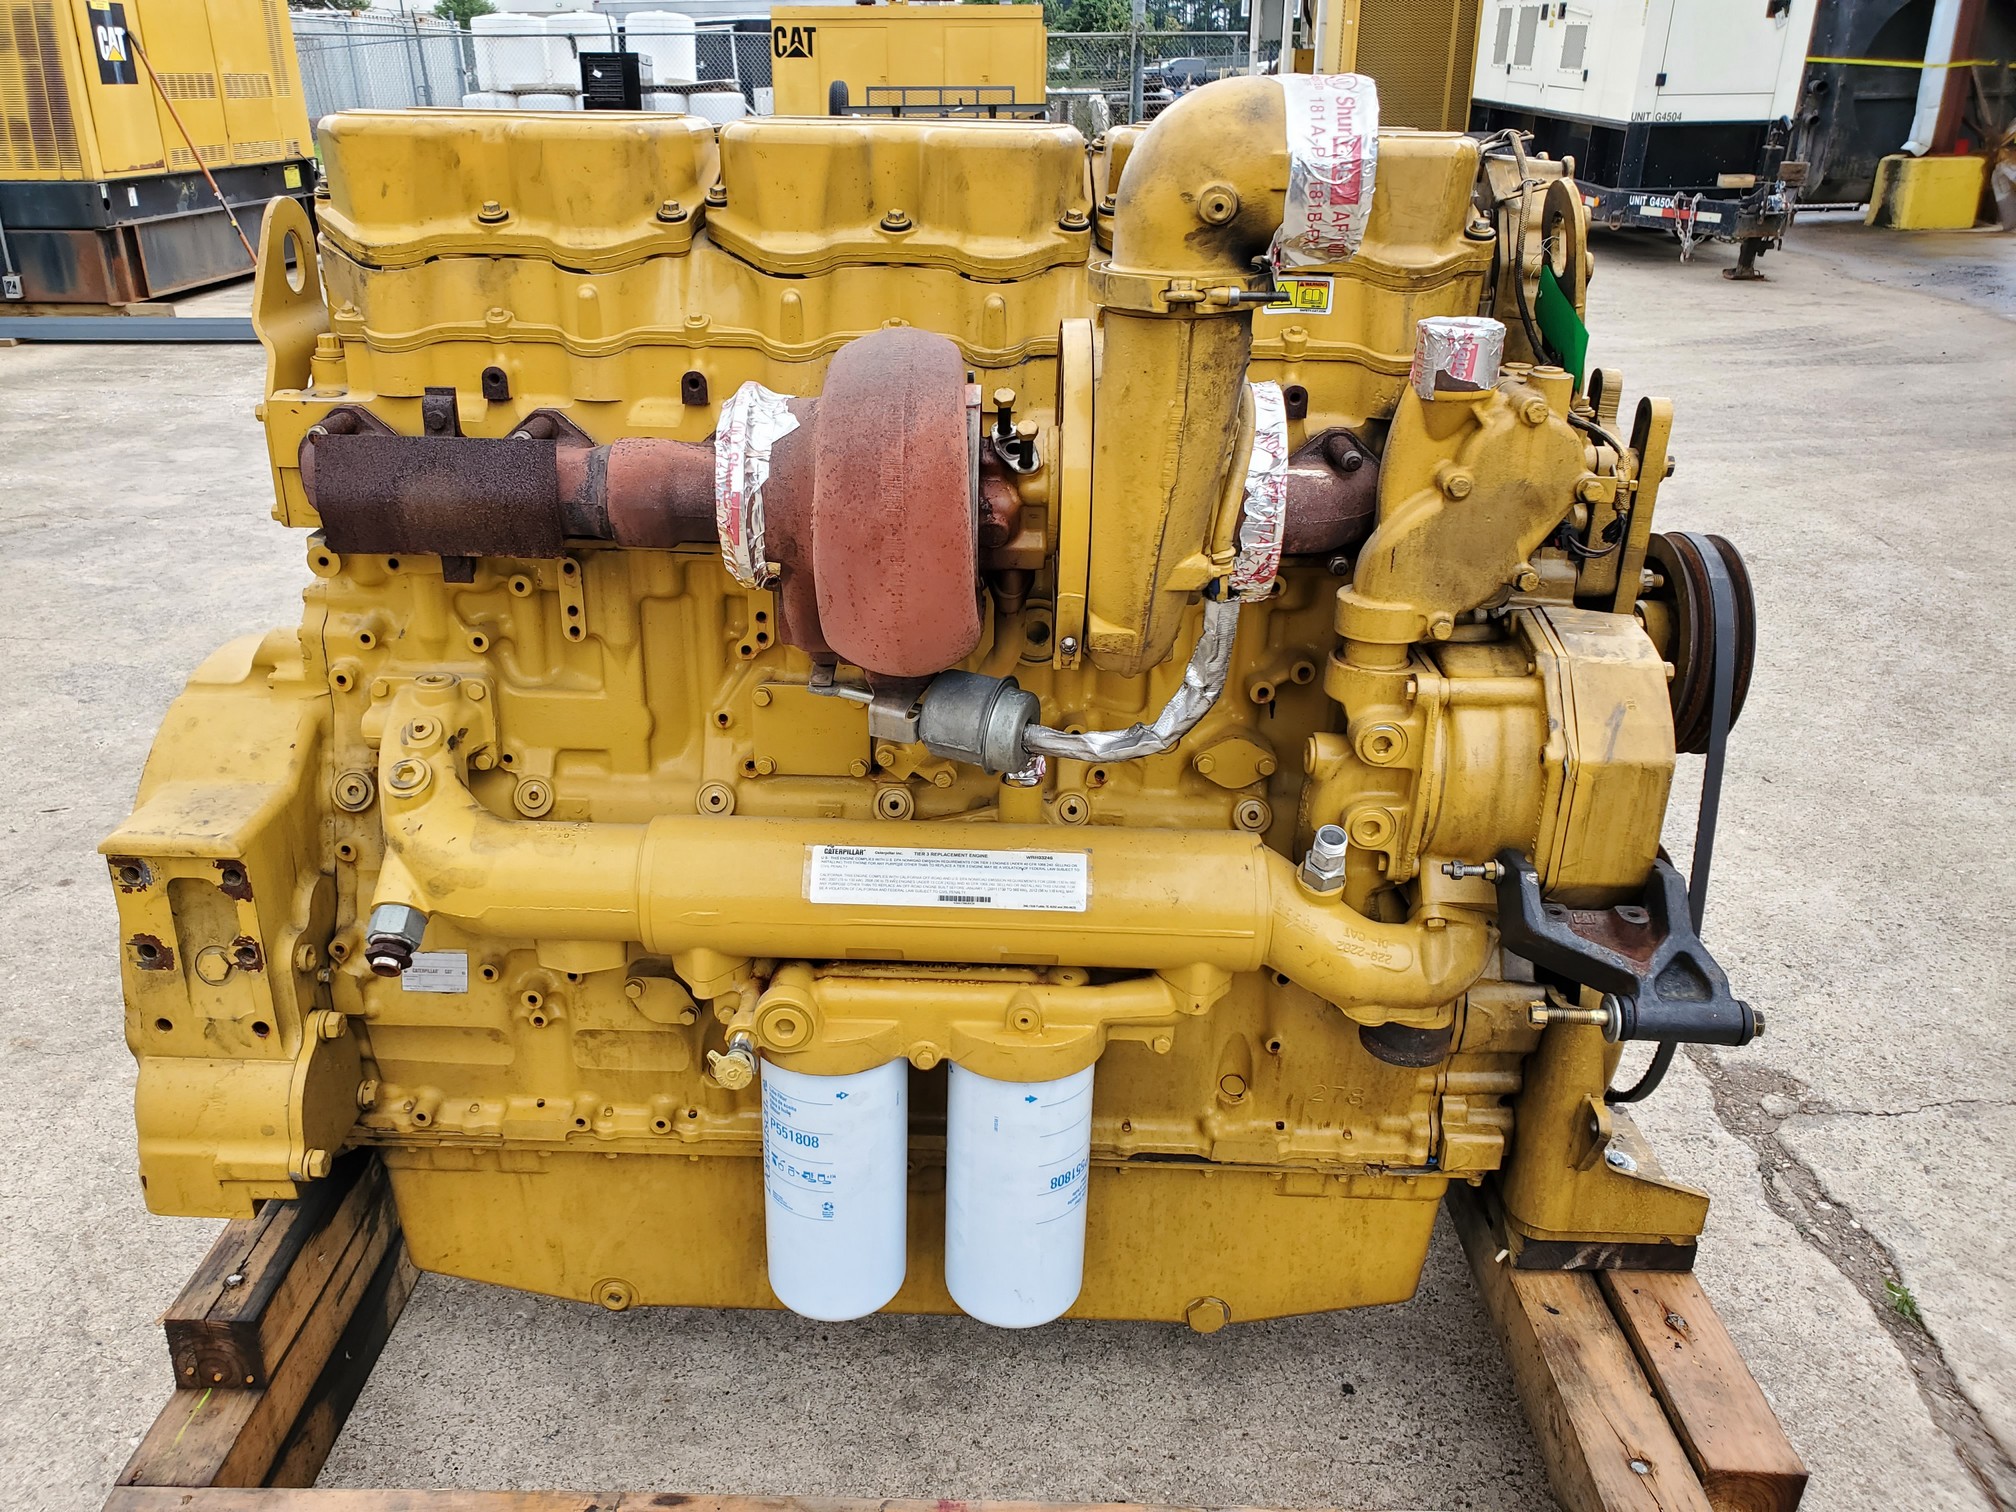 Why used Caterpillar Engines are the best?